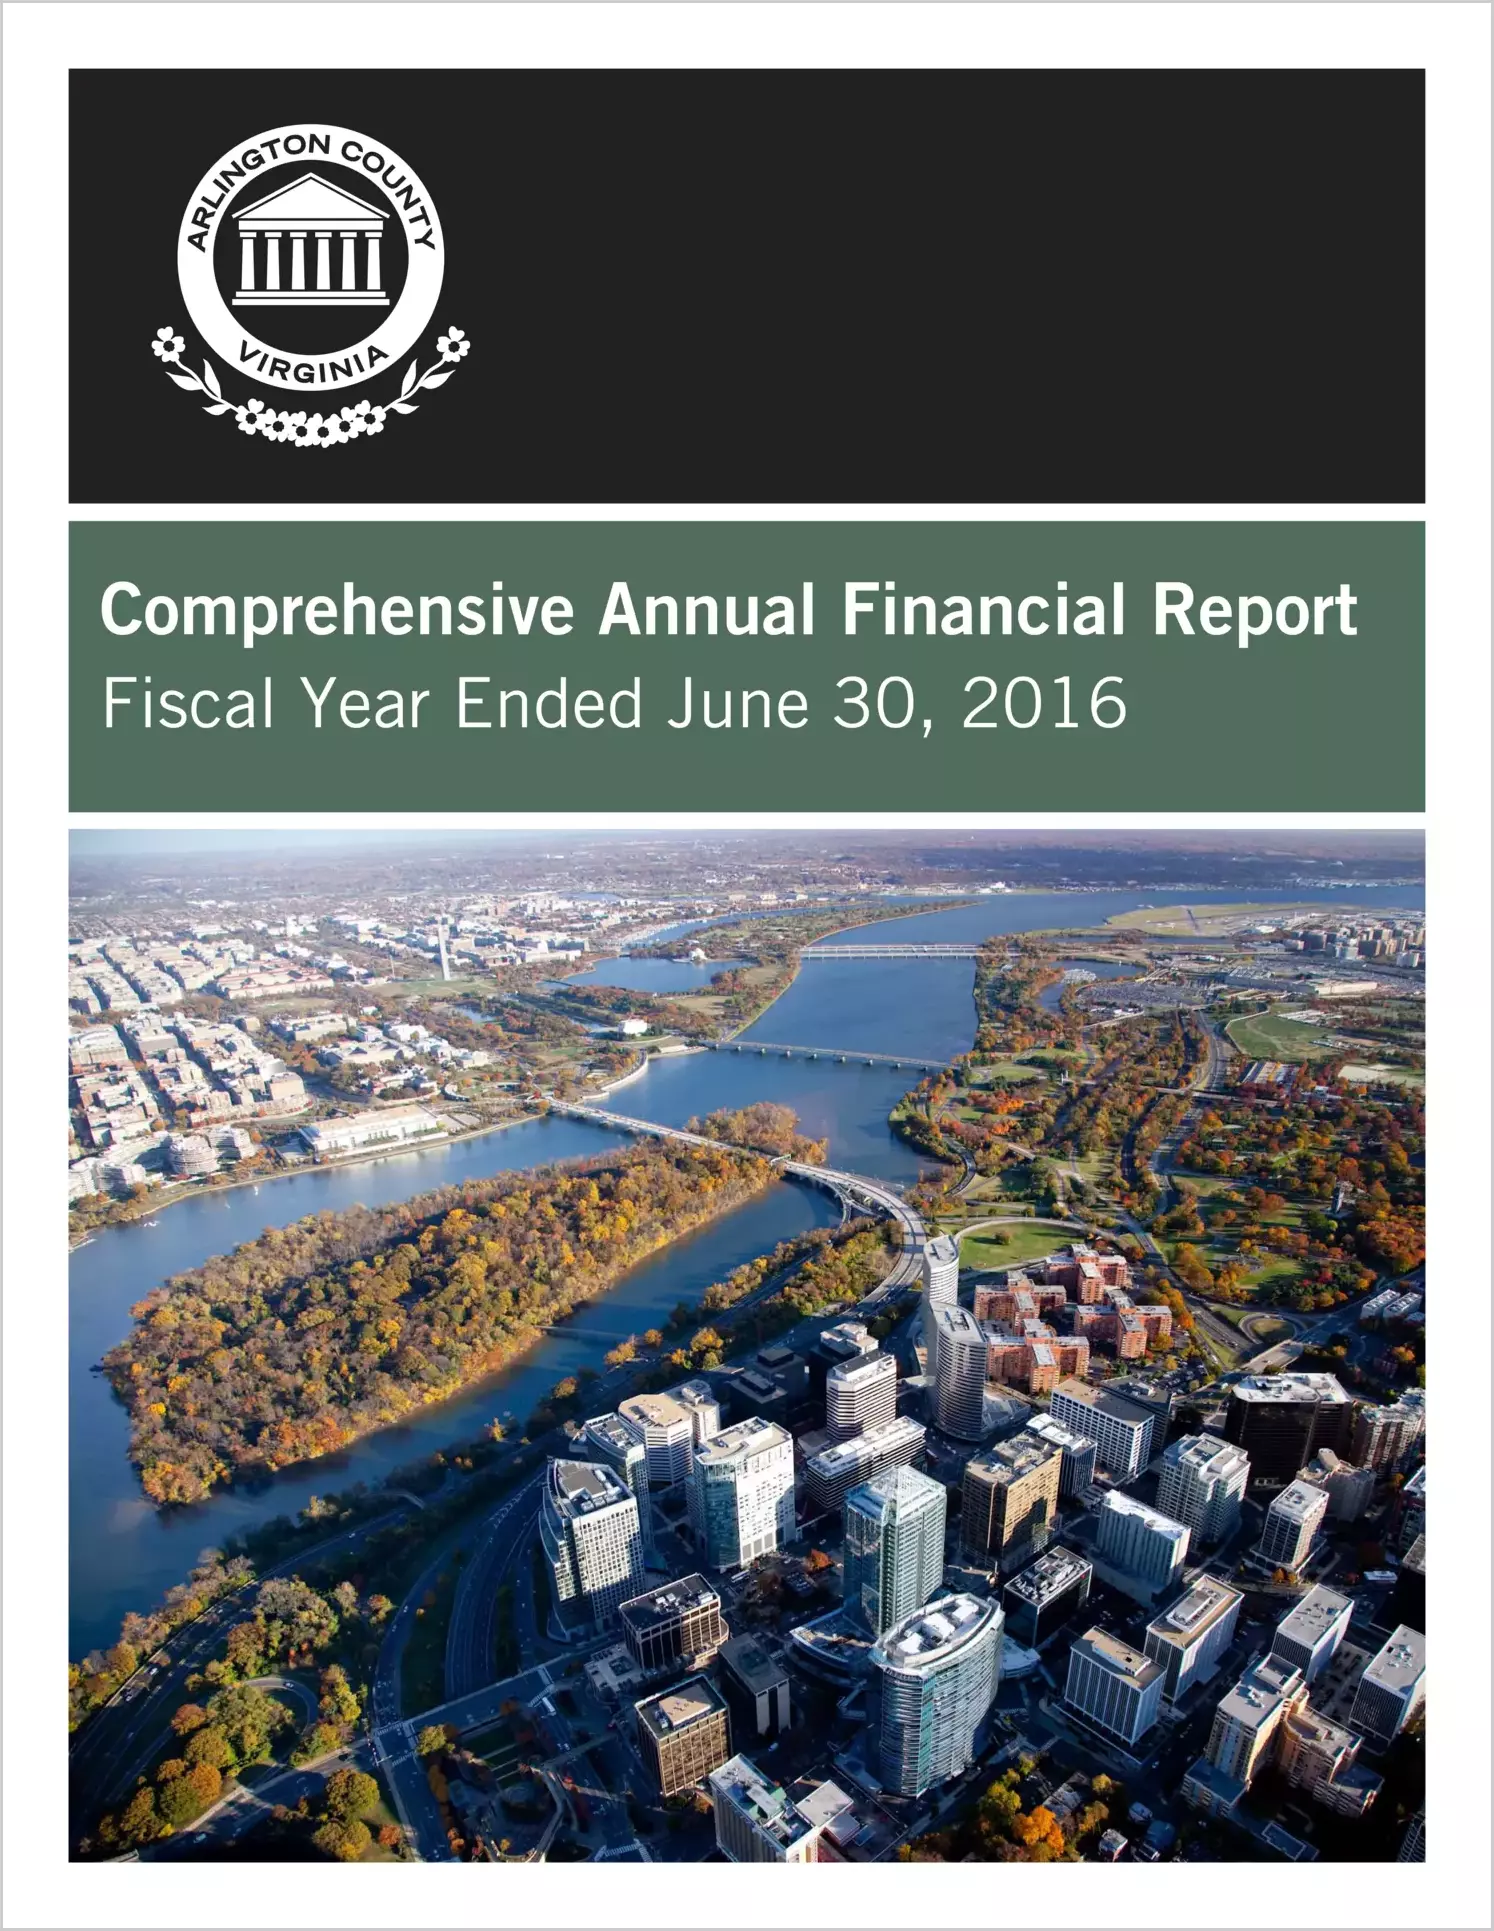 2016 Annual Financial Report for County of Arlington